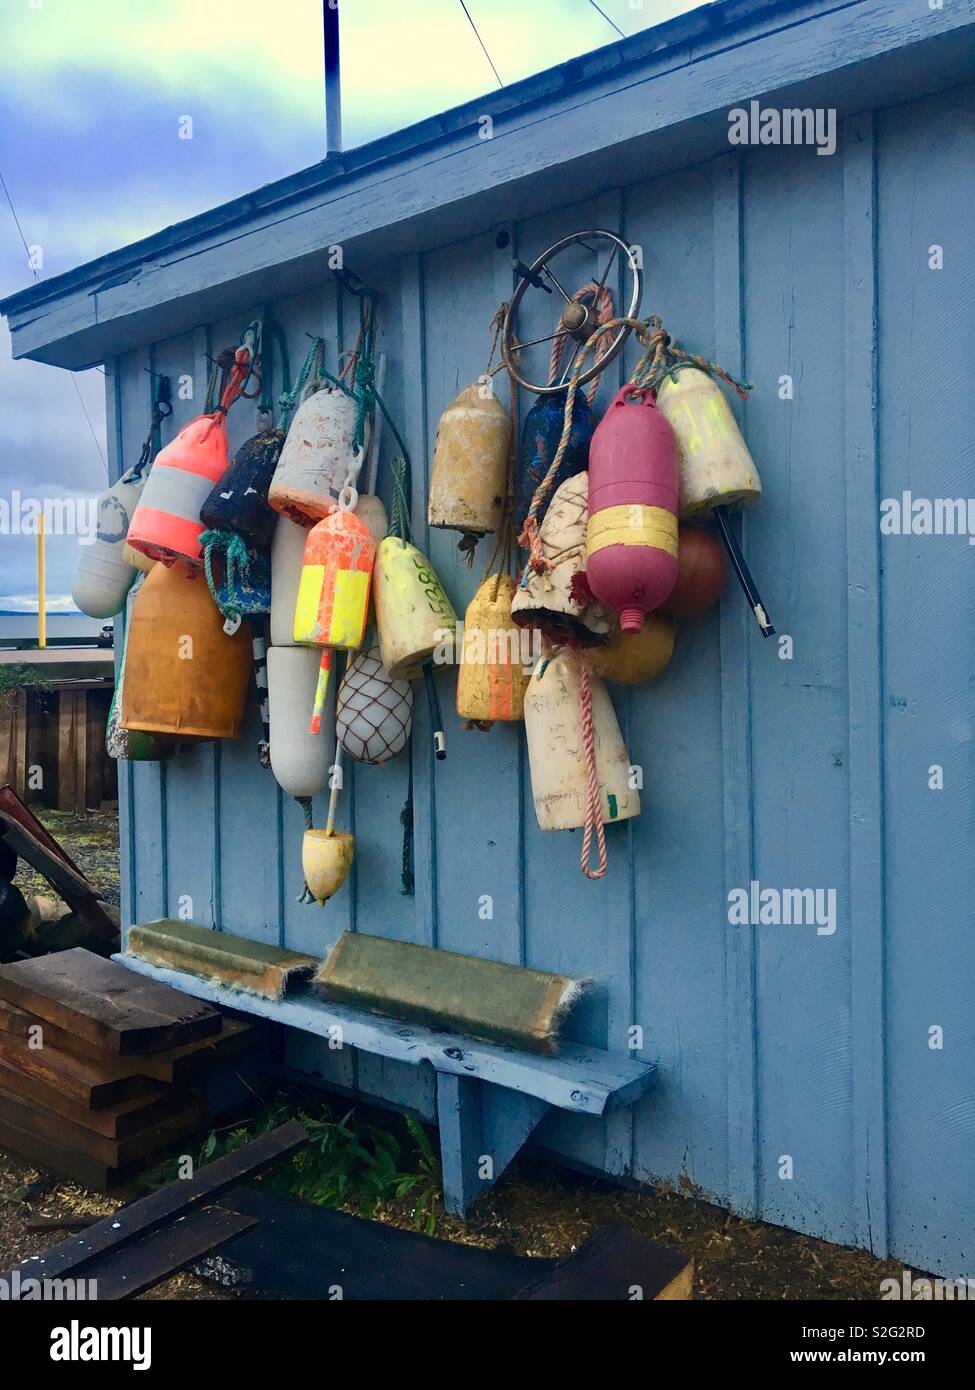 Fishing shed with old buoys hung up Stock Photo